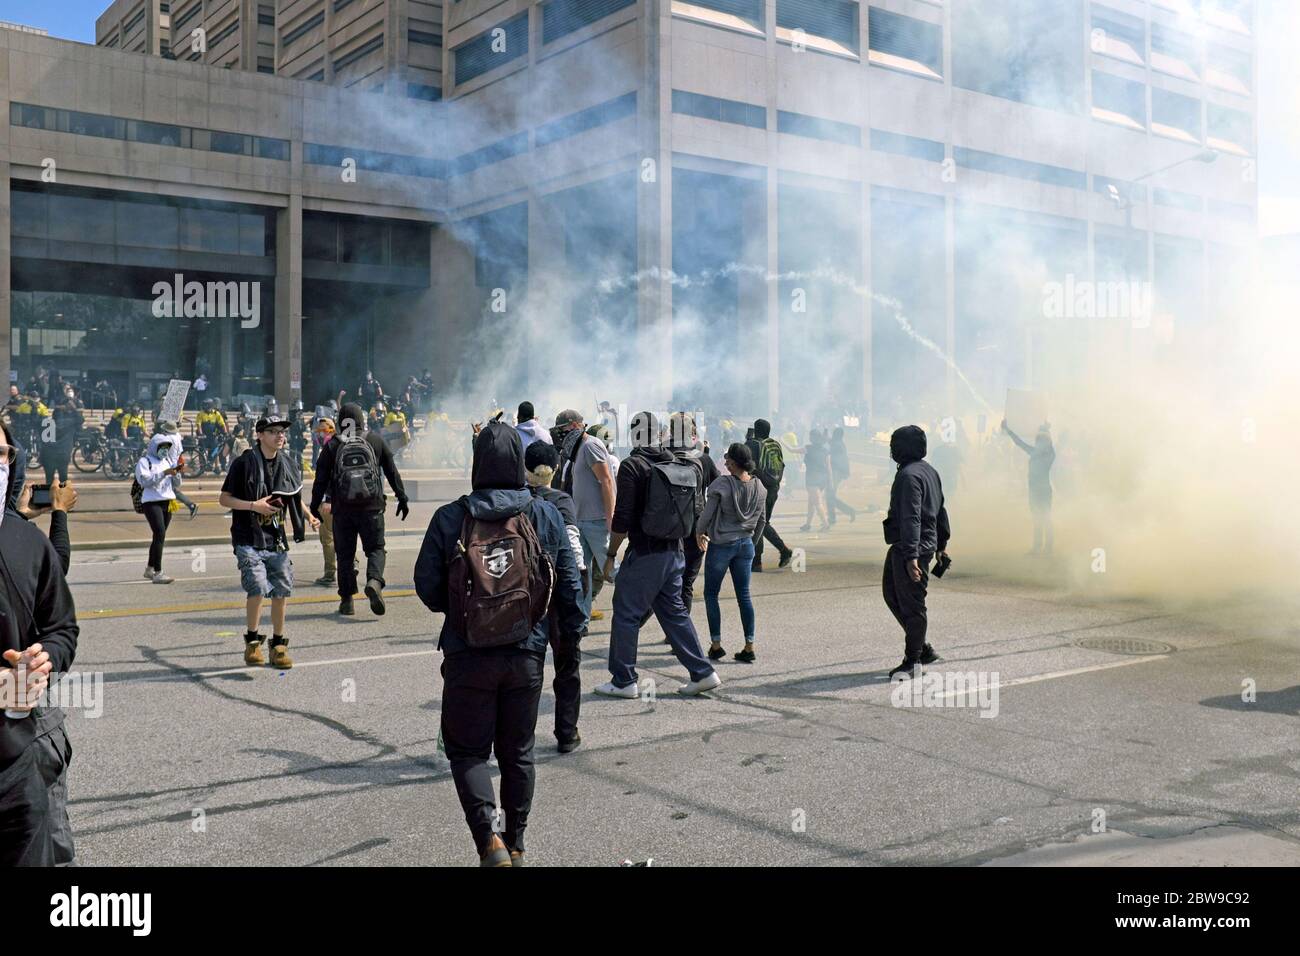 Police and demonstrators square off in front of the Justice Center in downtown Cleveland, Ohio, USA during protests of police brutality. Tear gas canisters volley between the police and demonstrators along Lakeside Avenue. Stock Photo